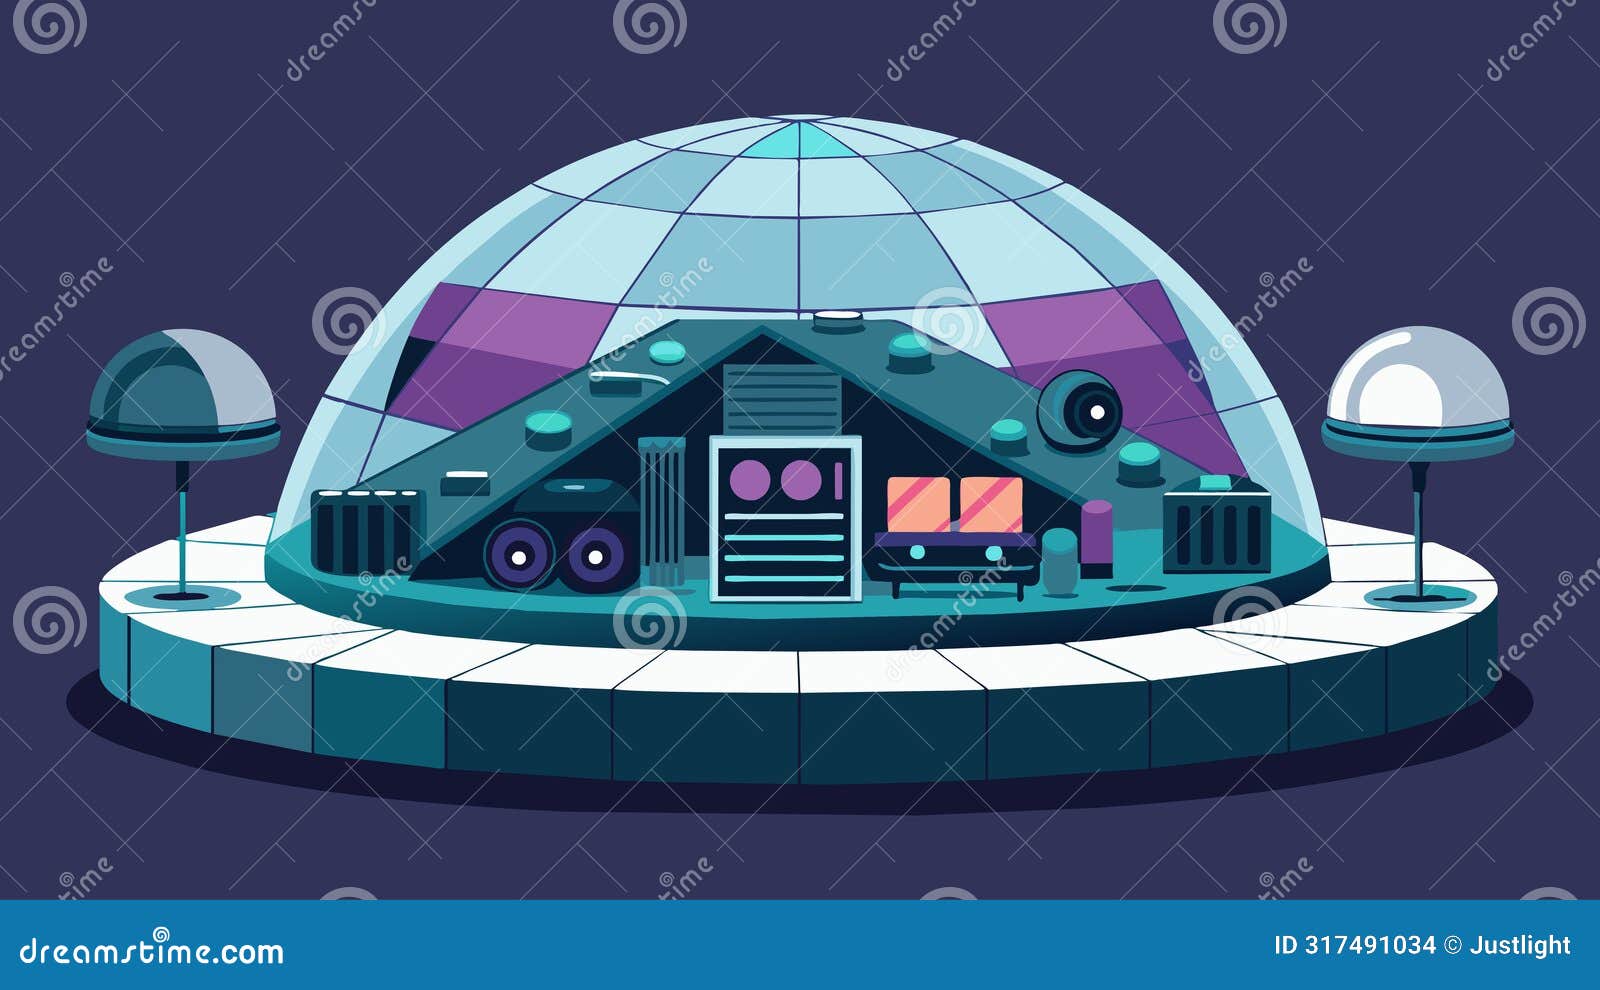 a futuristiclooking dome structure that serves as a hub for digital music creation featuring stateoftheart music